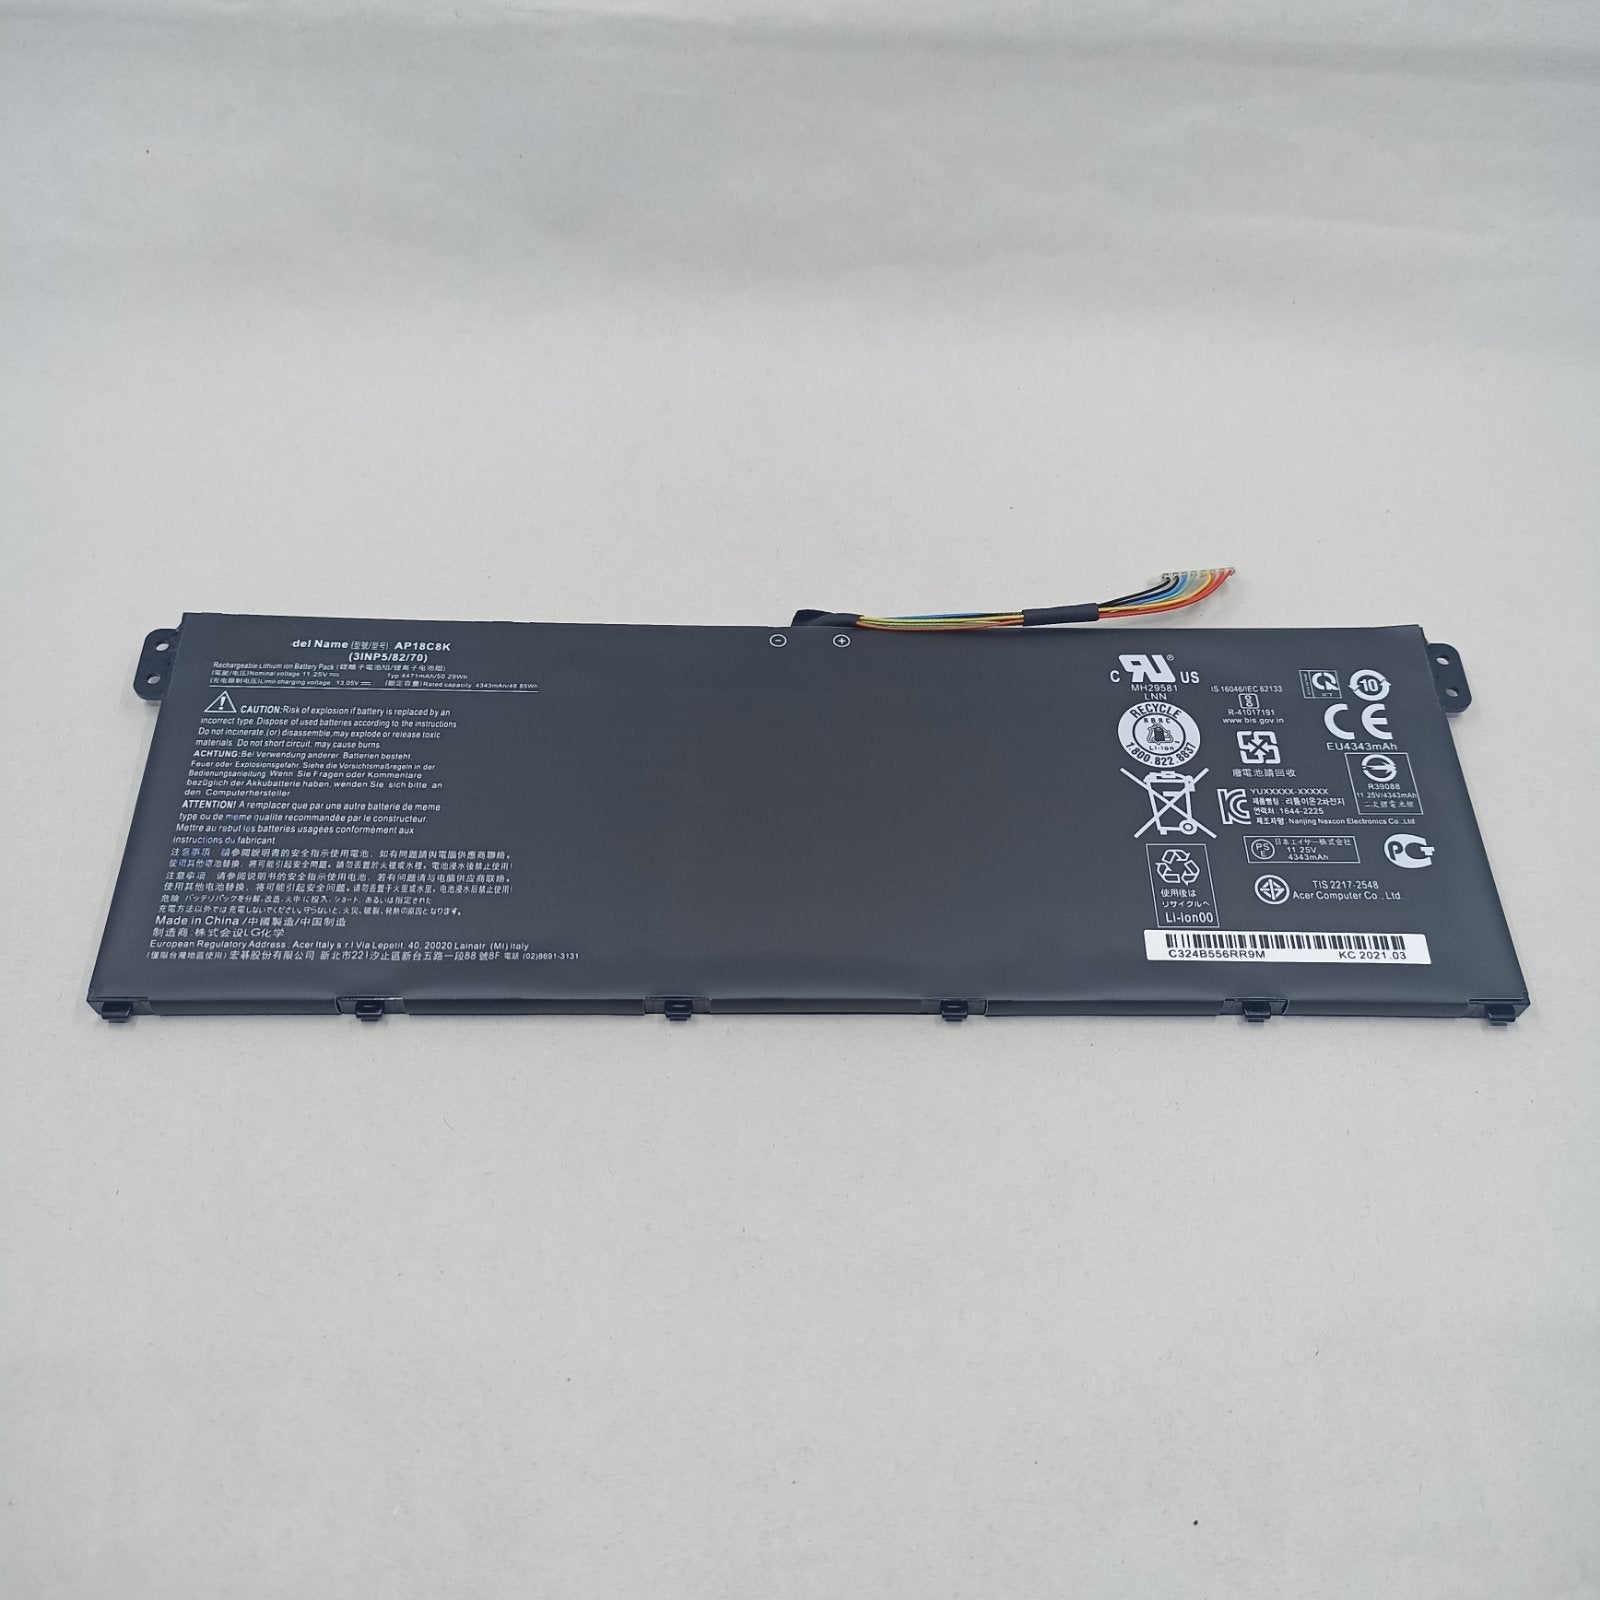 Replacement Battery for Acer A514-54 A1